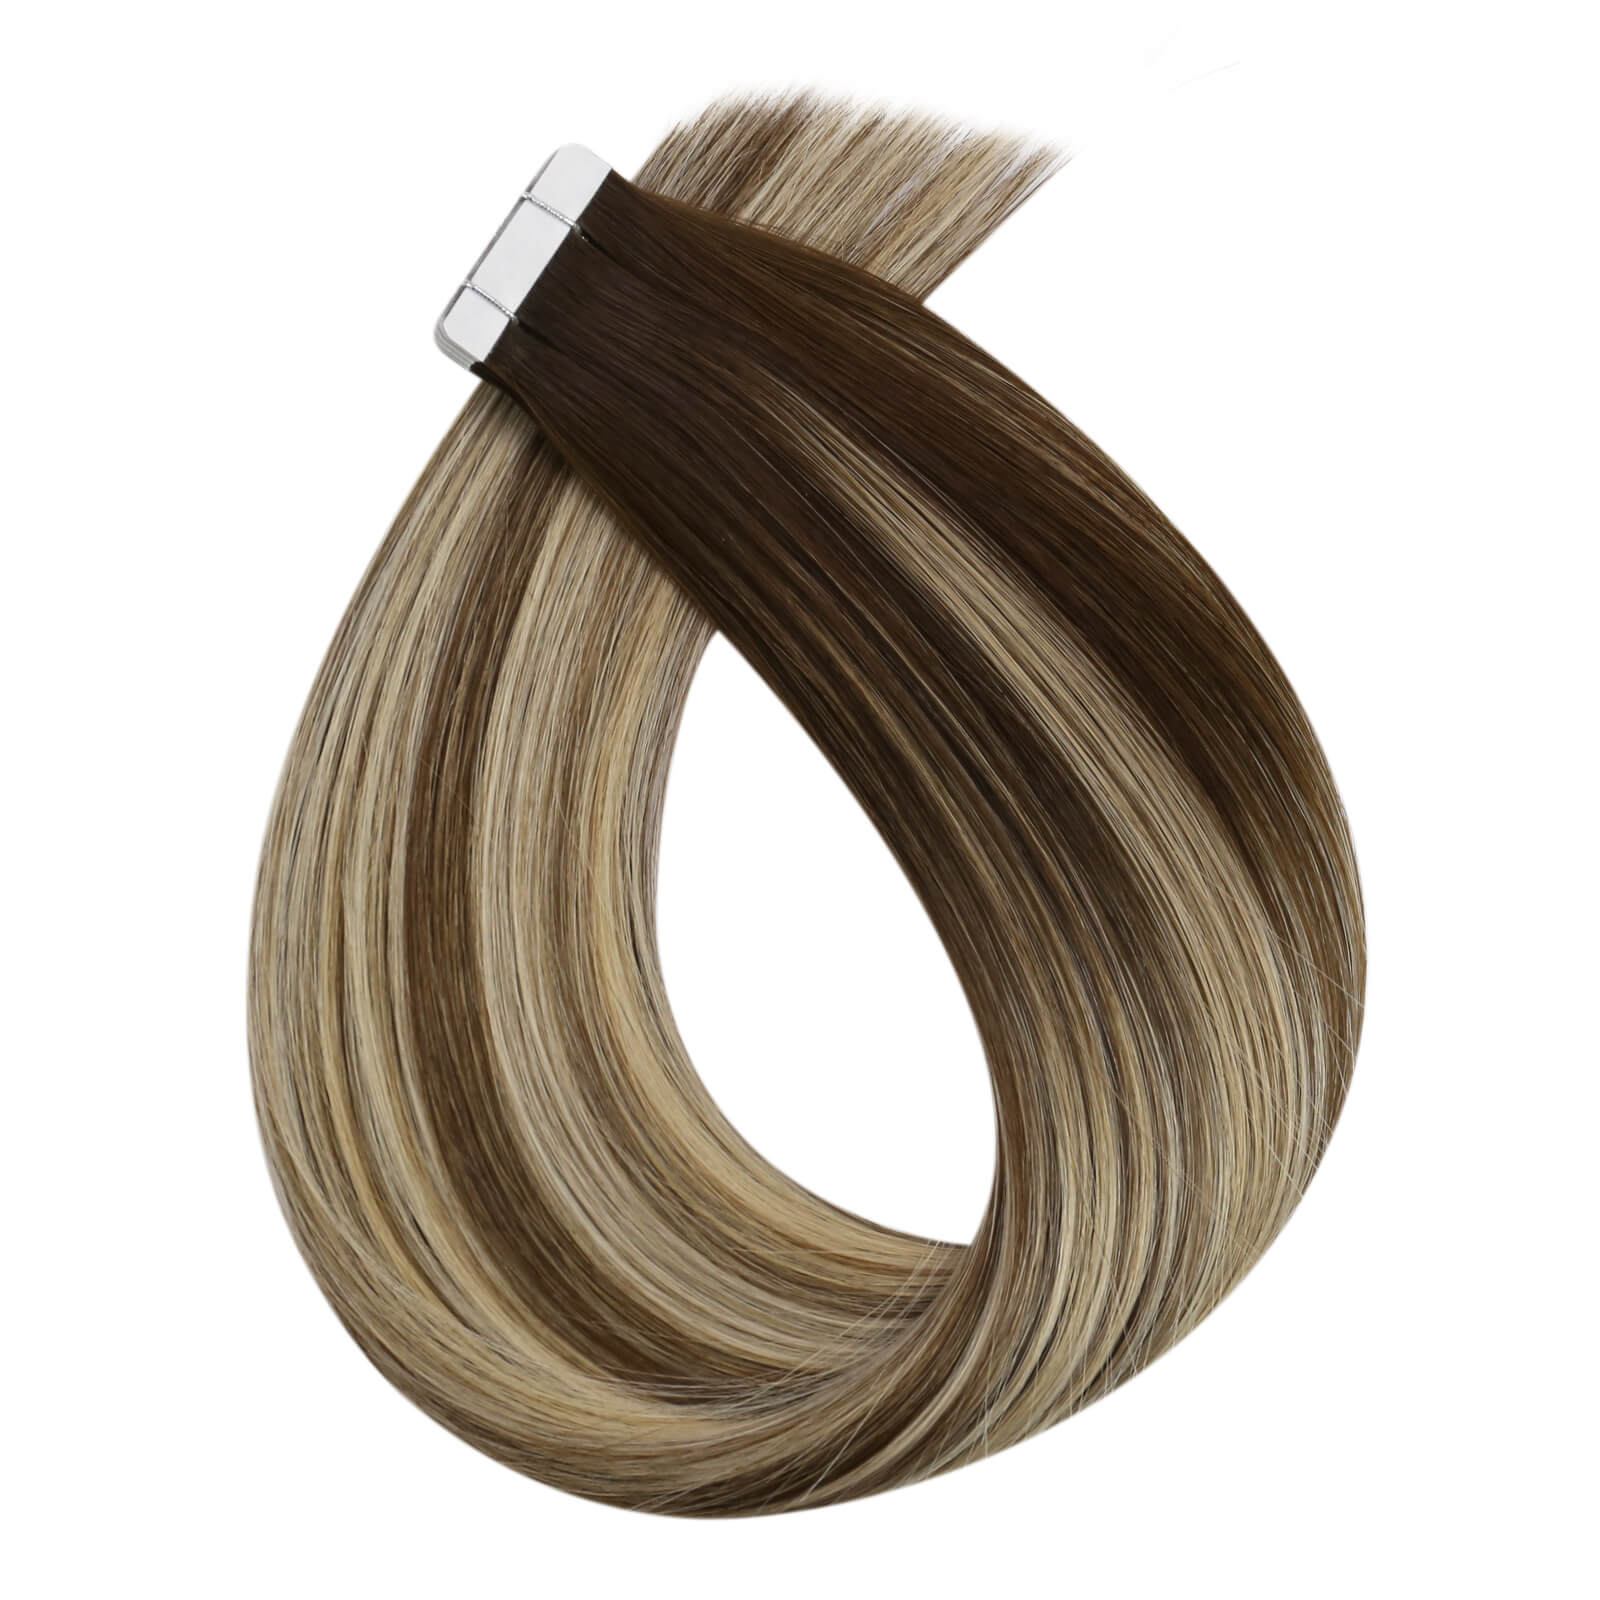 sunny hair in tape extensions, blonde tape in extensions, best quality virgin tape in hair extensions, high quality, natural tape ins, salon quality hair, long life hair